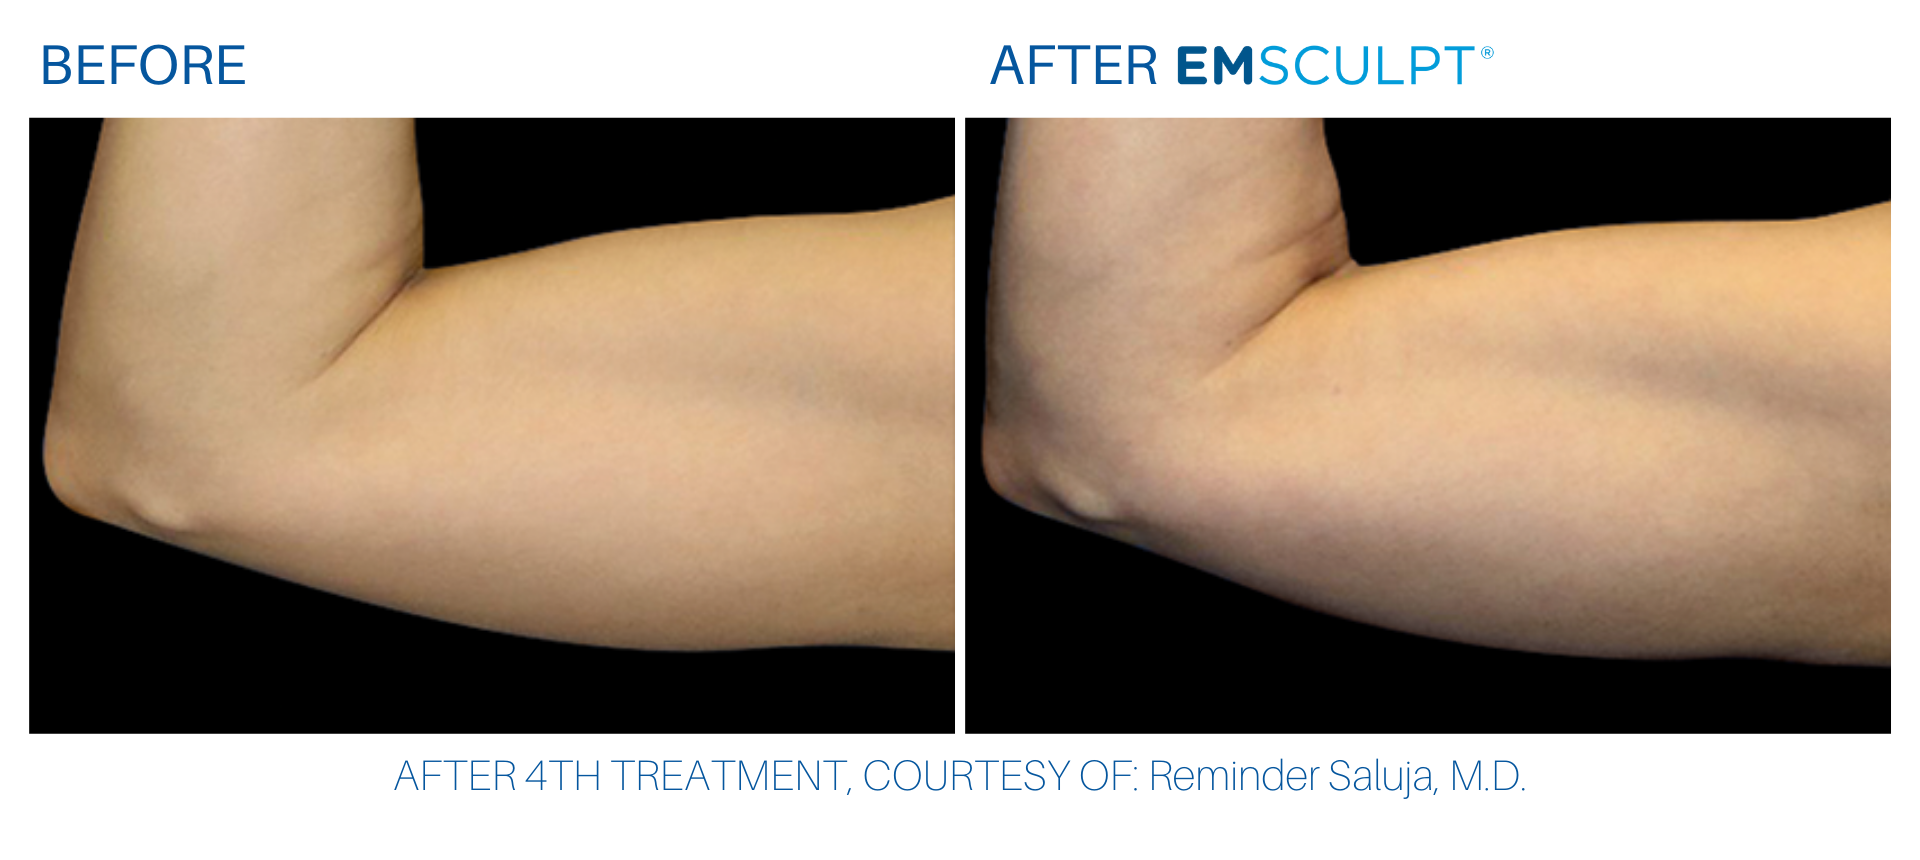 Bicep before and after Emsculpt treatment at Wellife Center.